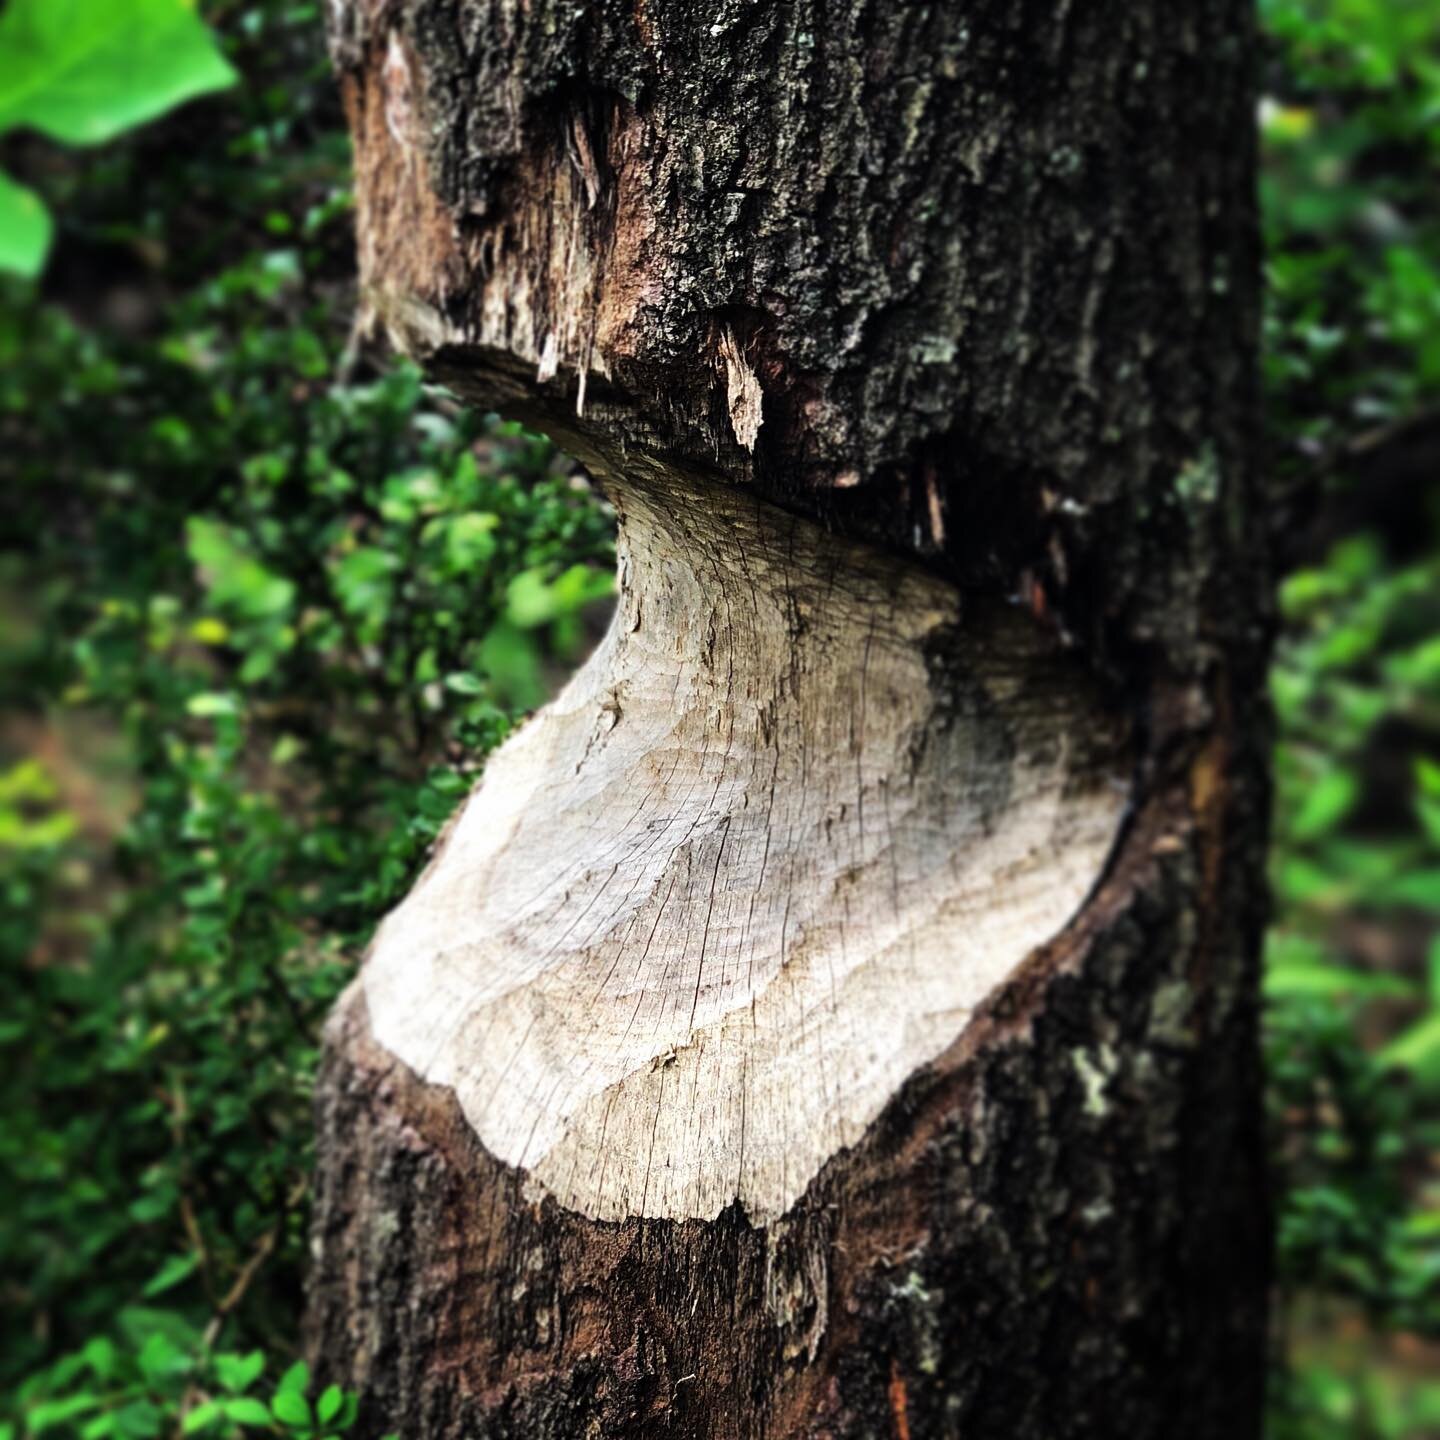 Beaver handiwork- Imagine the nocturnal industriousness that went into gnawing these tree trunks in order to eventually use them for dam building. Nearly hunted to extinction for their pelts used for hats and coats, beavers have made a comeback in th